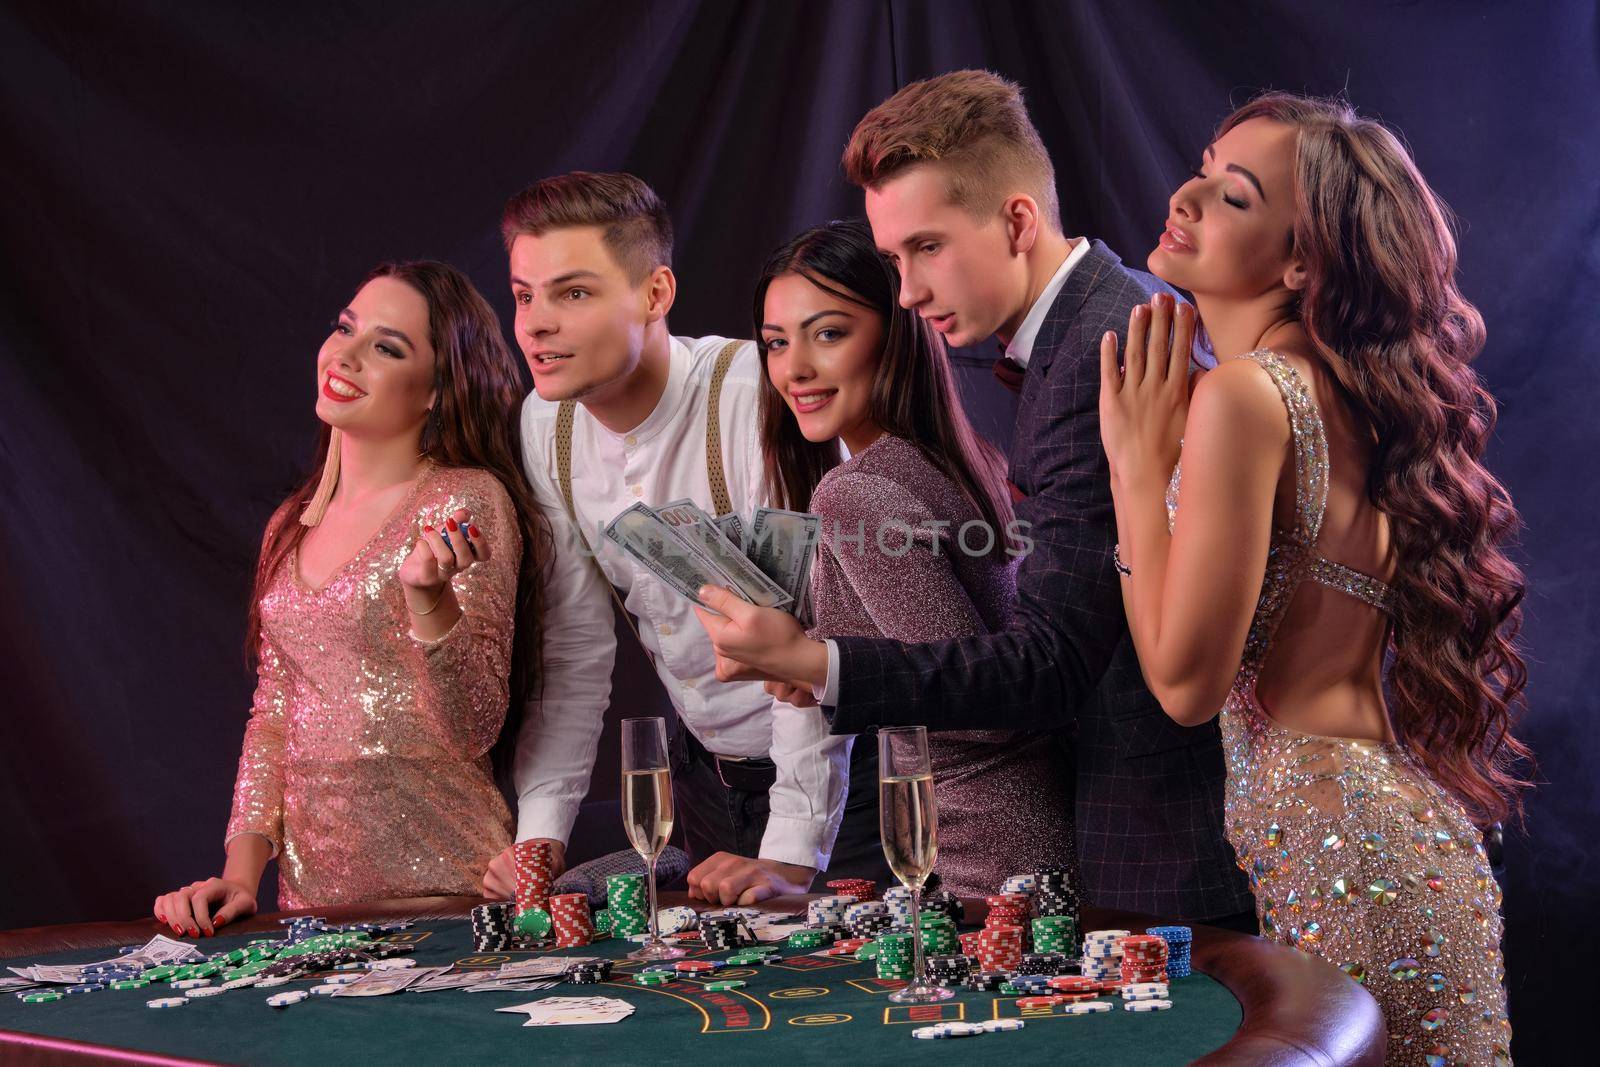 Friends are playing poker at casino, at table with stacks of chips, money, cards, champagne on it. Celebrating their win, smiling. Black background. Gambling entertainment. Side view. Close-up.